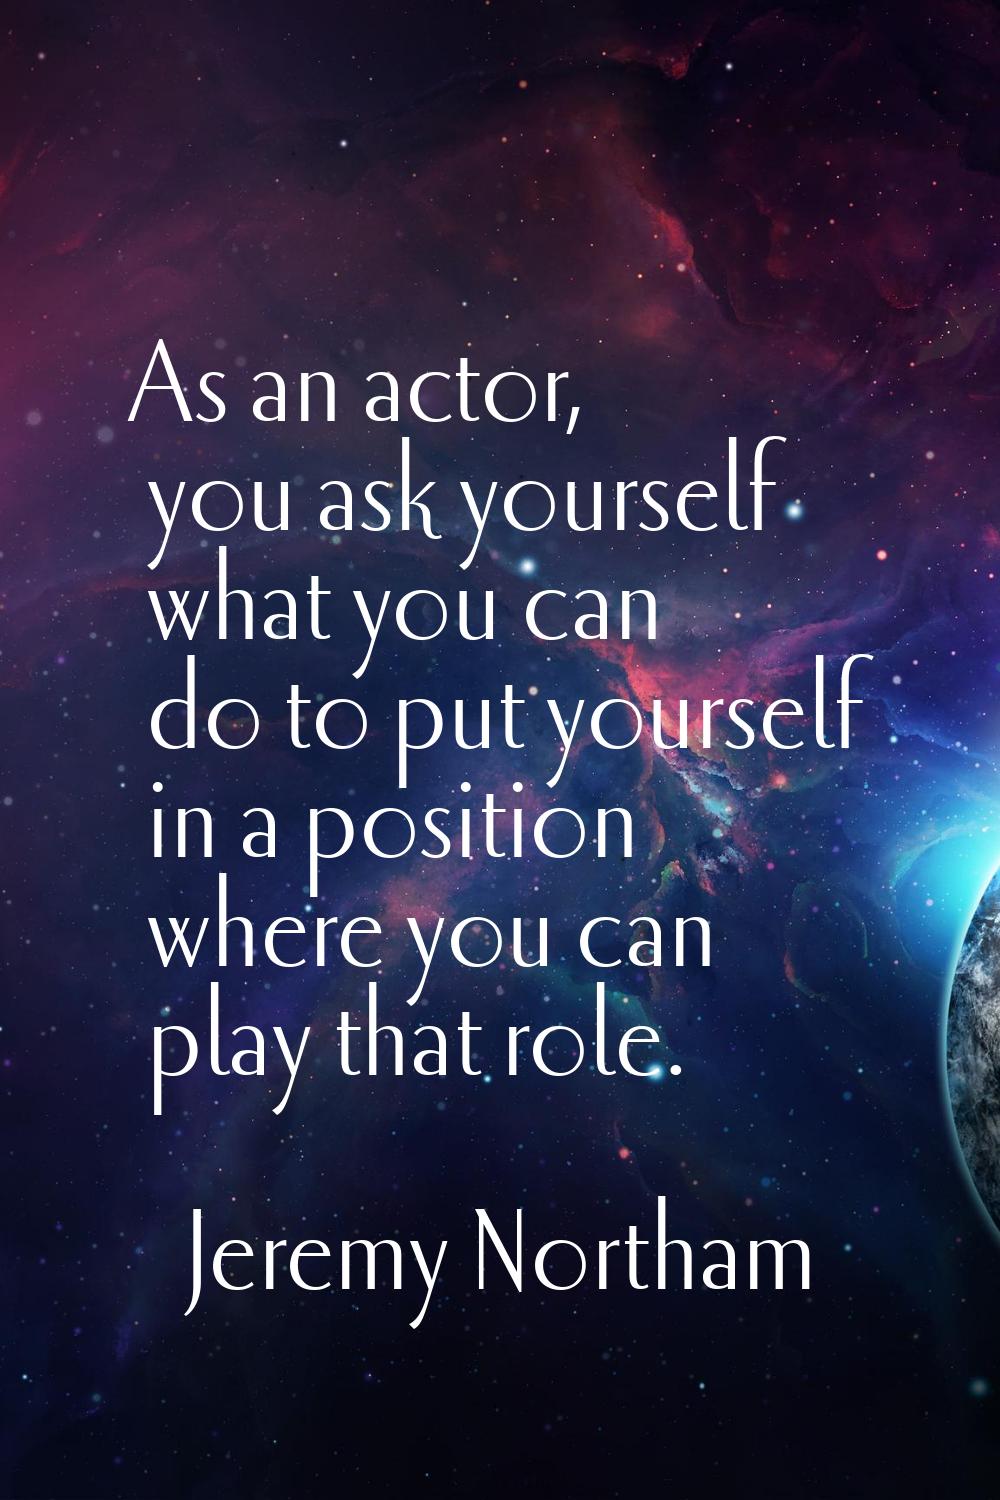 As an actor, you ask yourself what you can do to put yourself in a position where you can play that